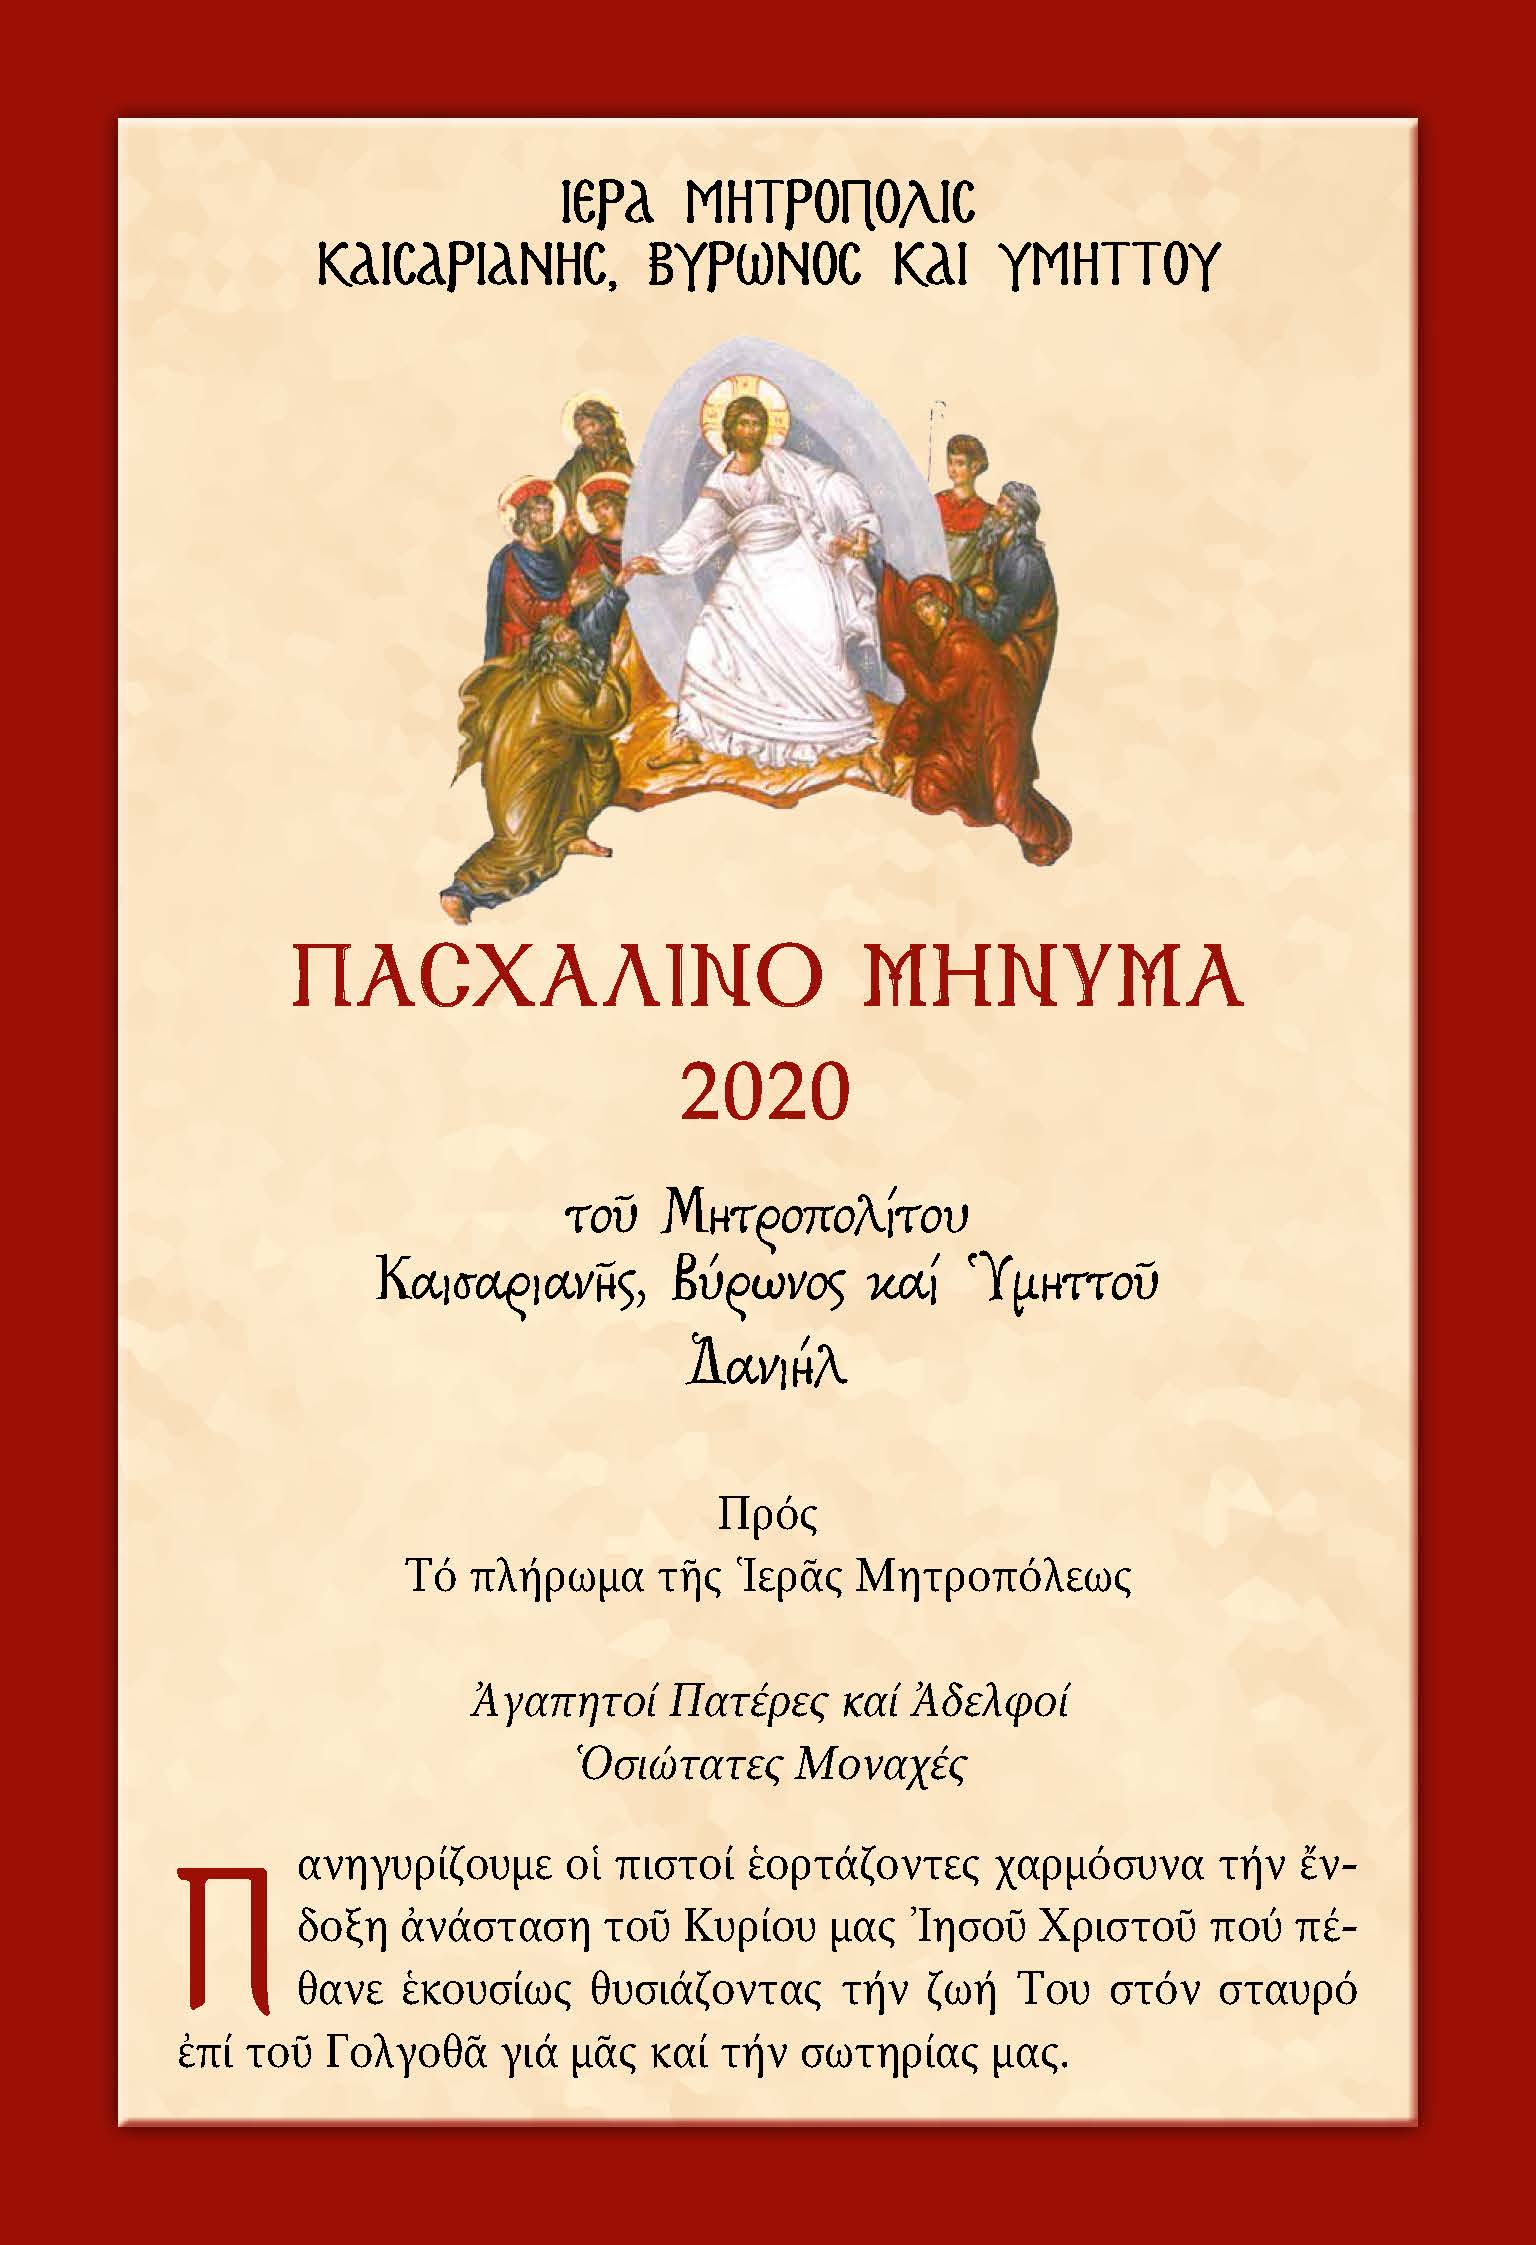 mes EASTER 2020 σελιδες Page 1